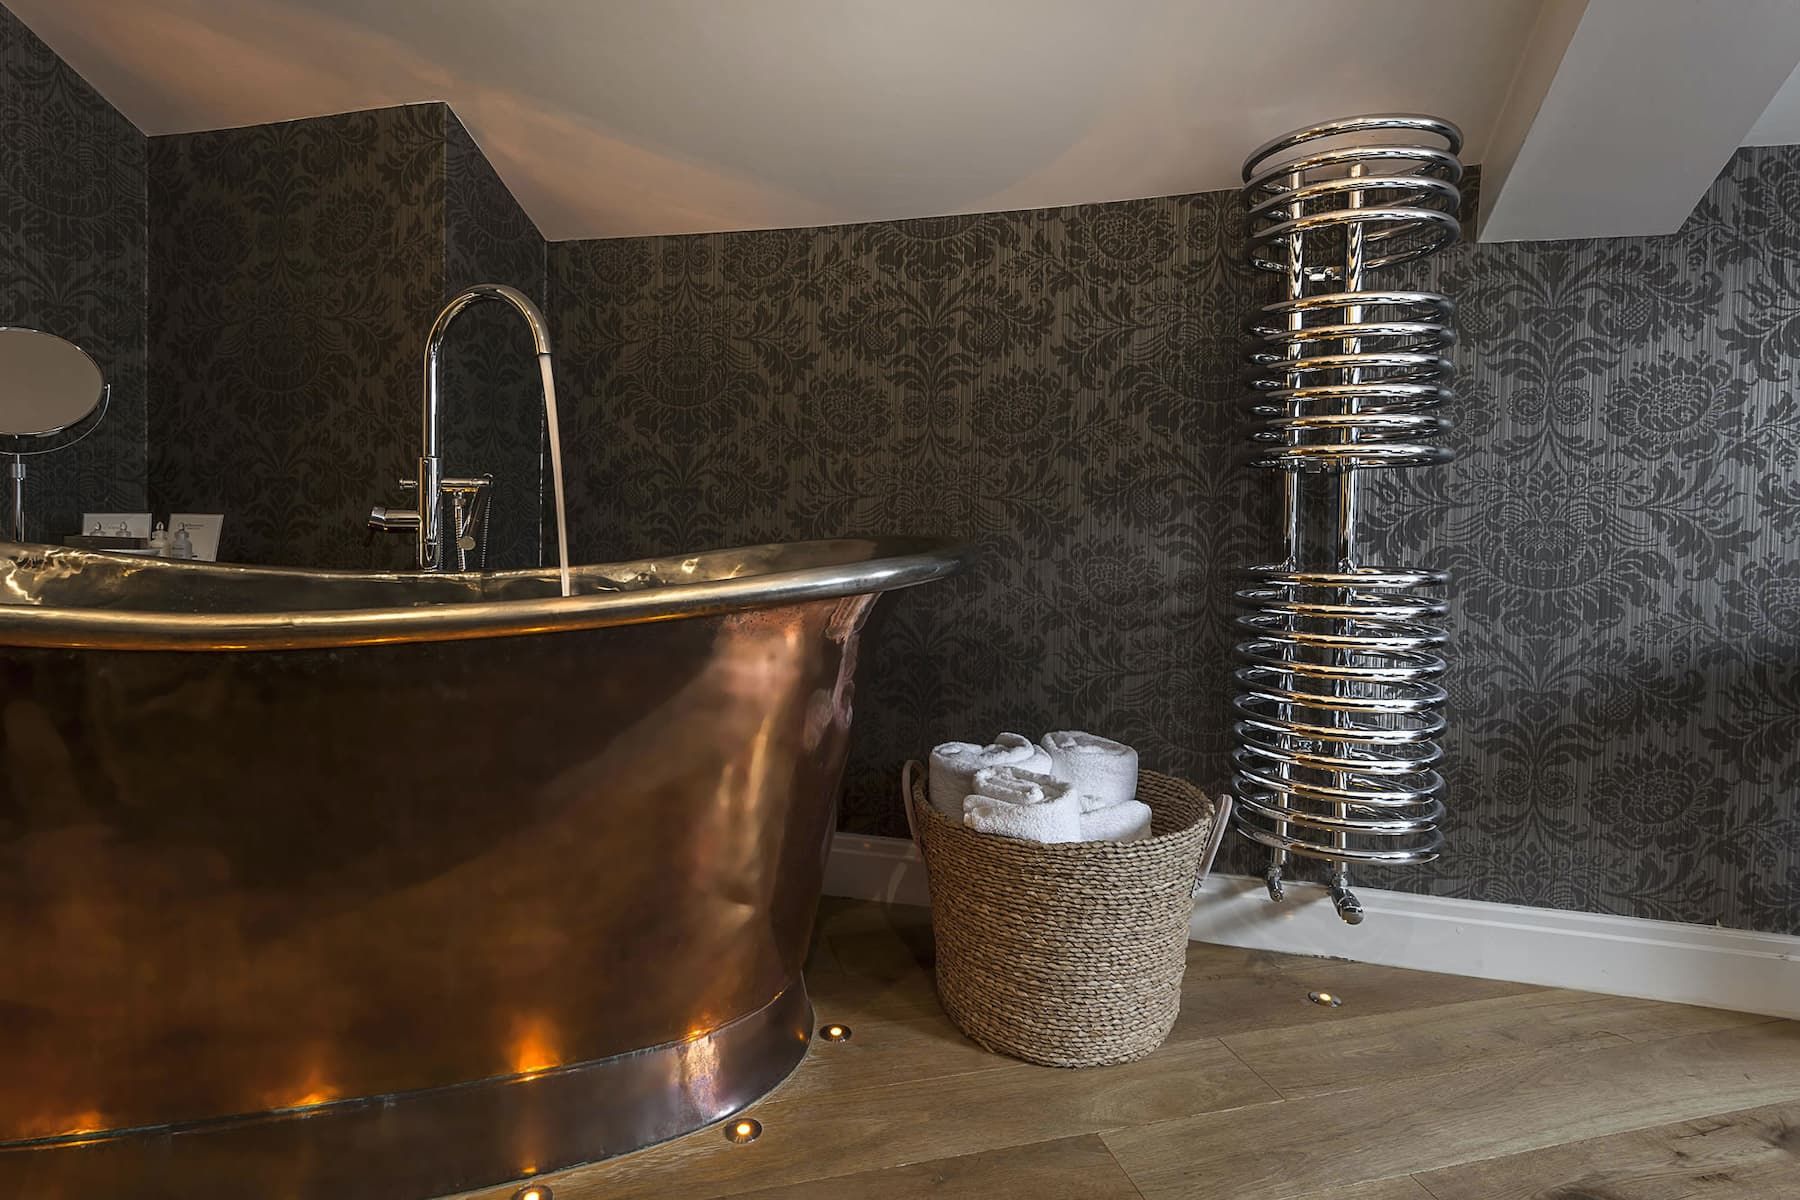 Luxury Hotels With Roll Top Baths, Hotels With Giant Bathtubs Uk